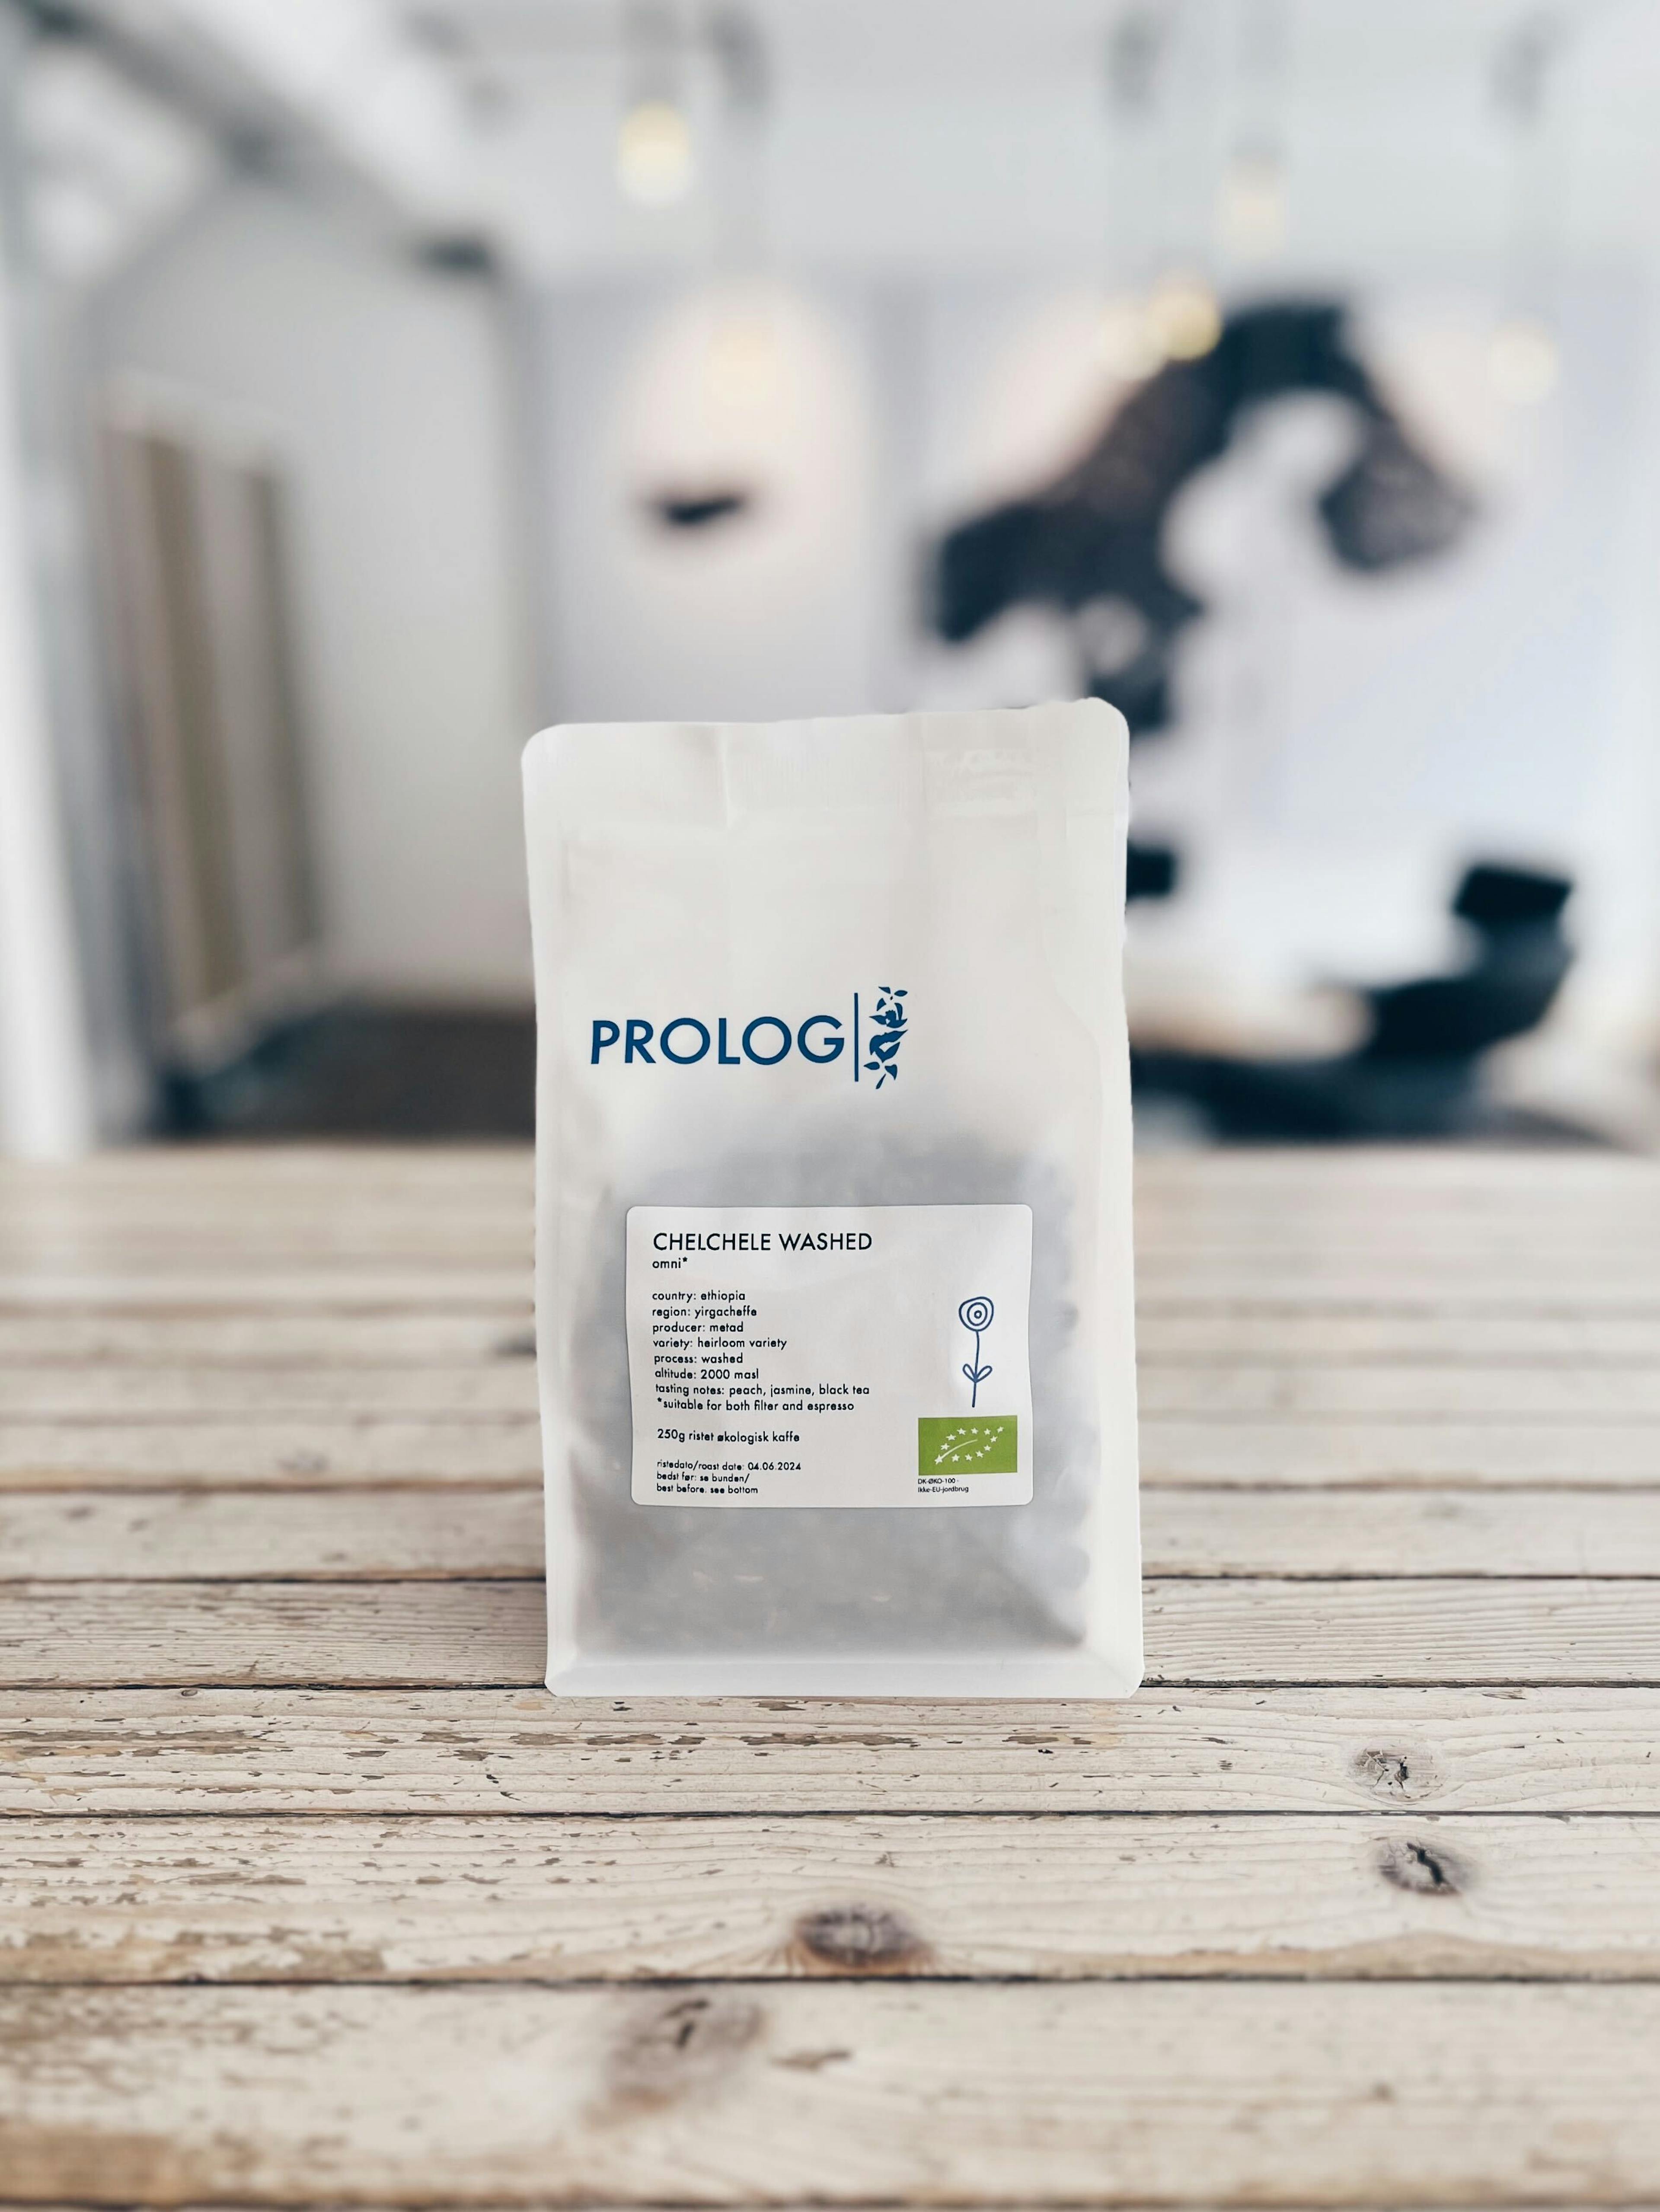 Bag of speciality coffee from Prolog on a counter